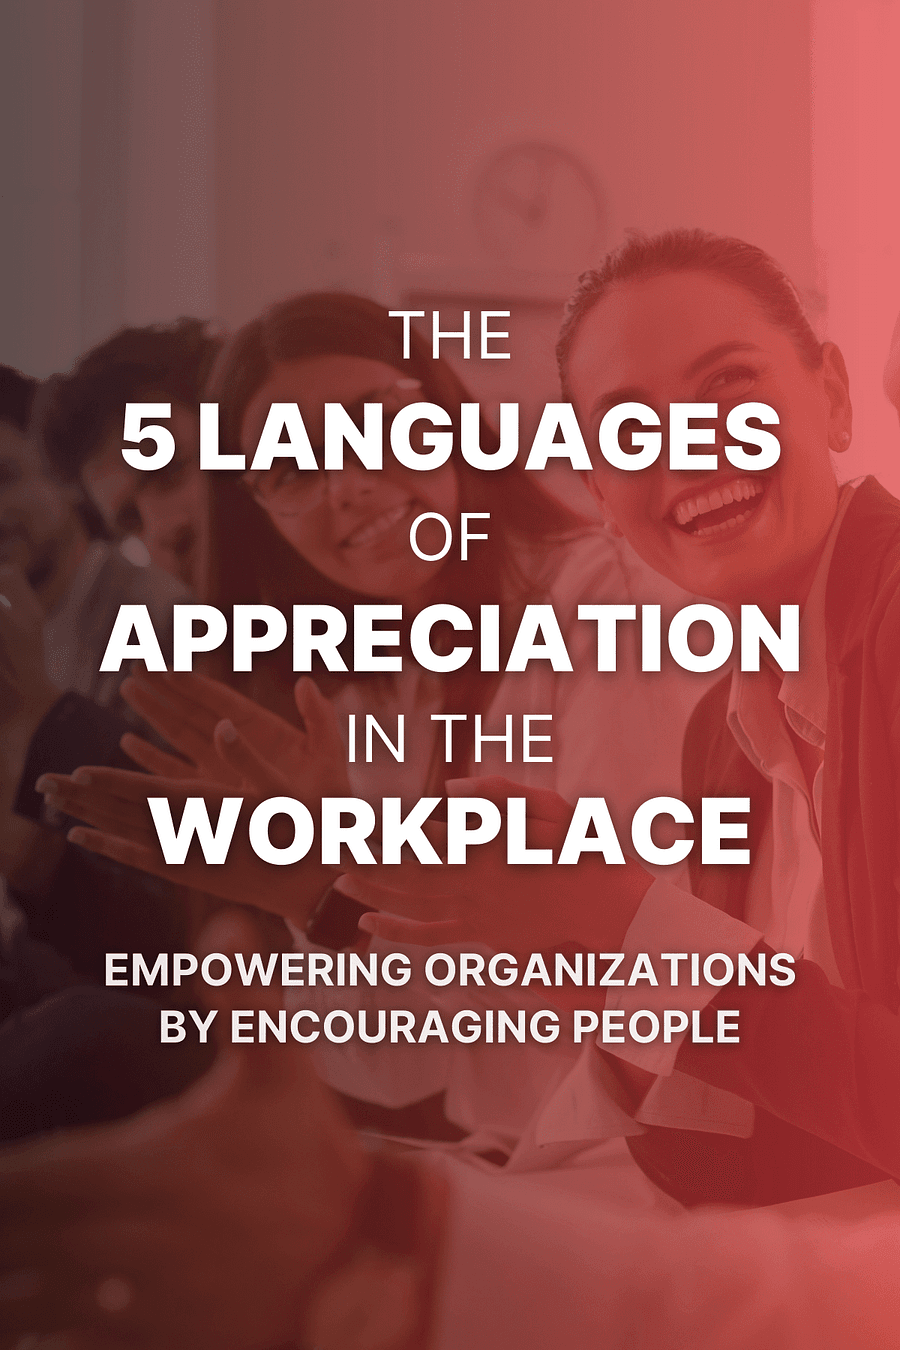 The 5 Languages of Appreciation in the Workplace by Gary Chapman, Paul White - Book Summary